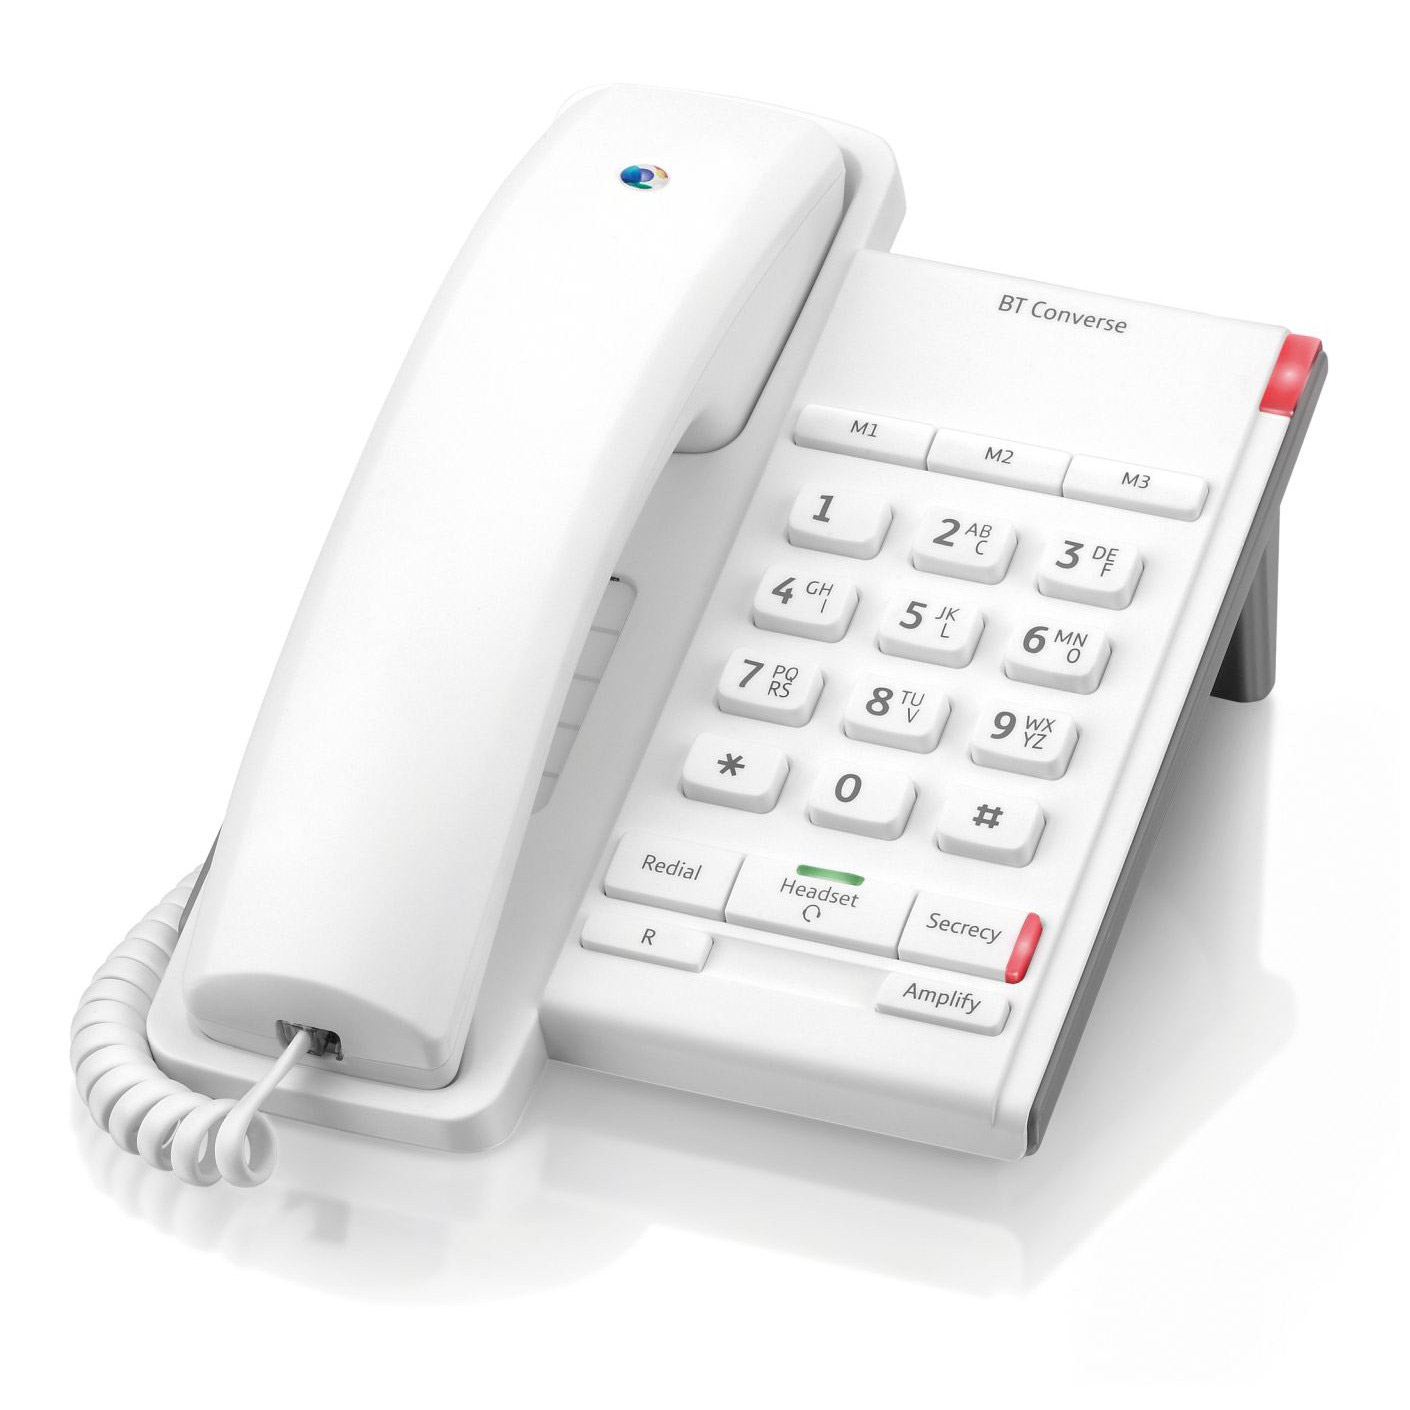 Image of BT 040205 BT Converse 2100 Corded Telephone in White